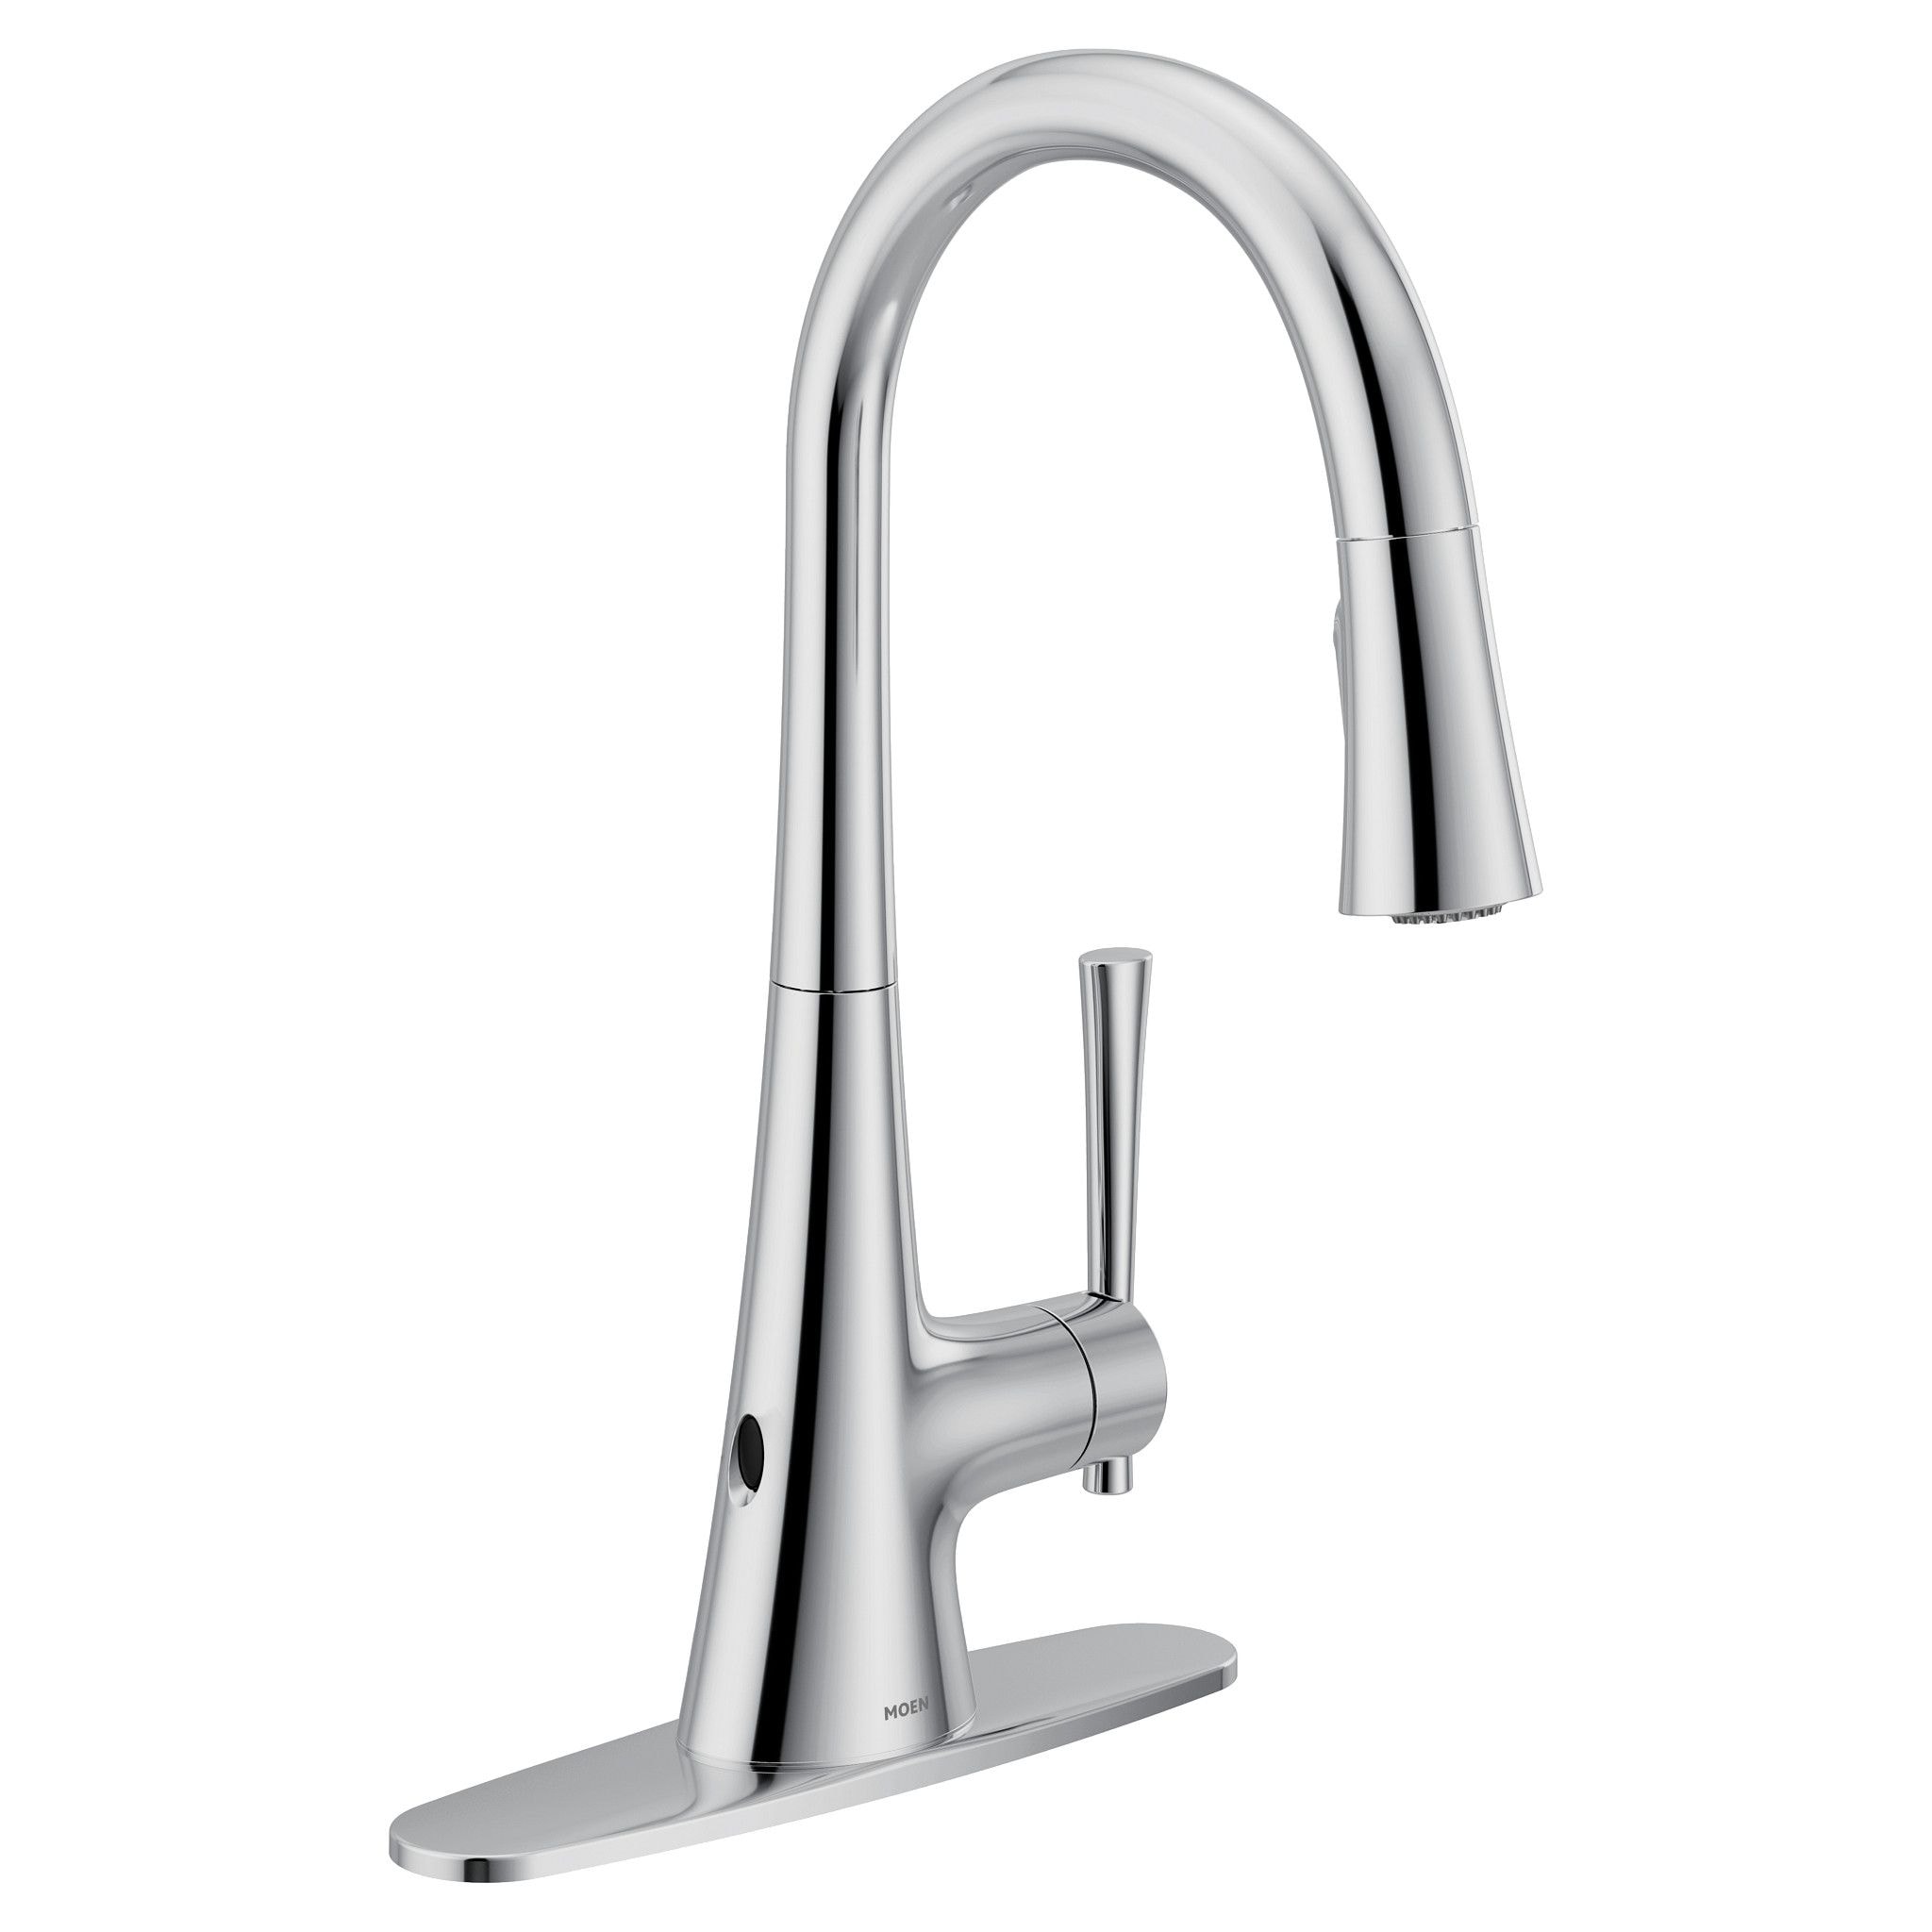 Moen Kurv Chrome Single Handle Pull-down Touchless Kitchen Faucet with ...